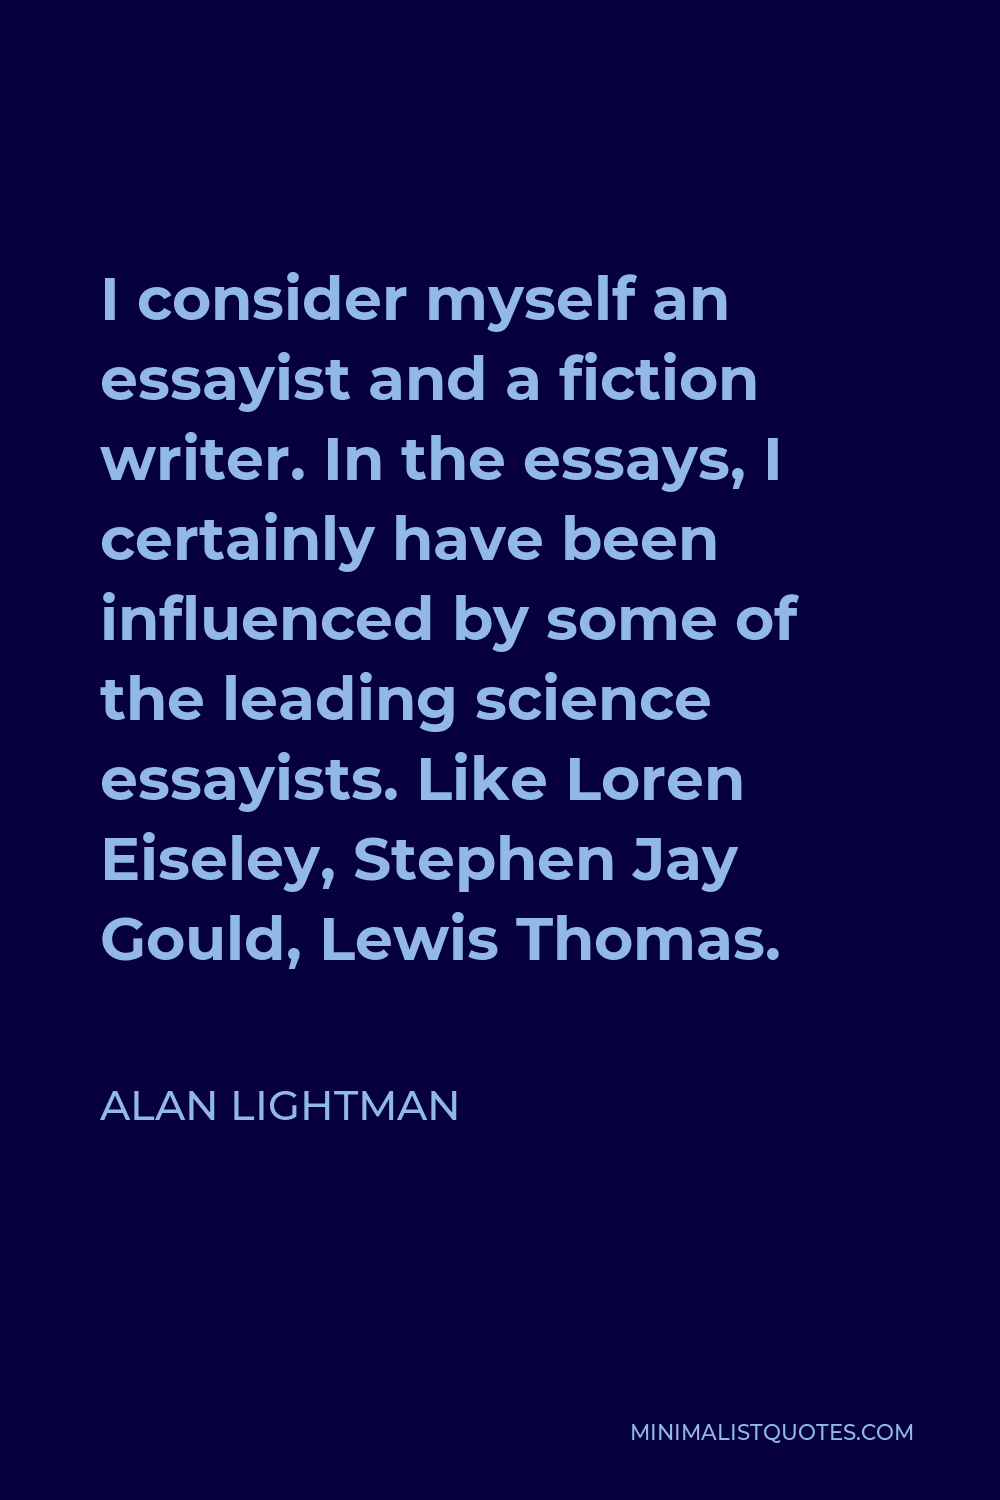 Alan Lightman Quote - I consider myself an essayist and a fiction writer. In the essays, I certainly have been influenced by some of the leading science essayists. Like Loren Eiseley, Stephen Jay Gould, Lewis Thomas.